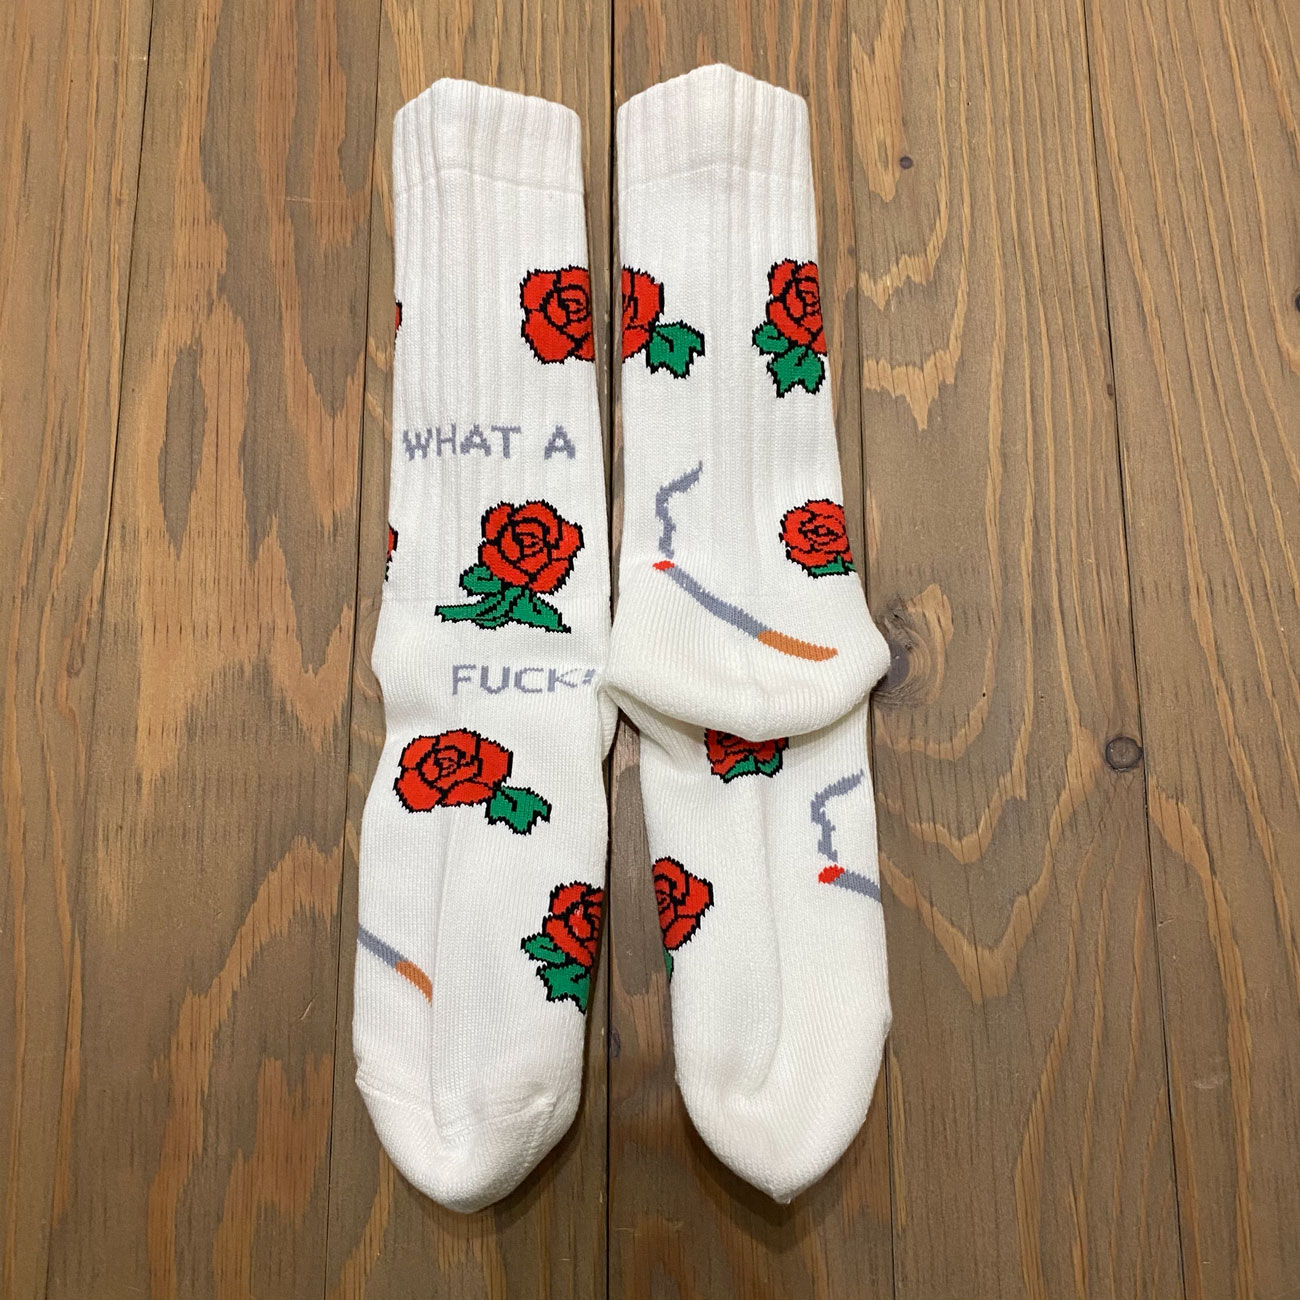 CHING & CO. ROSE SOX